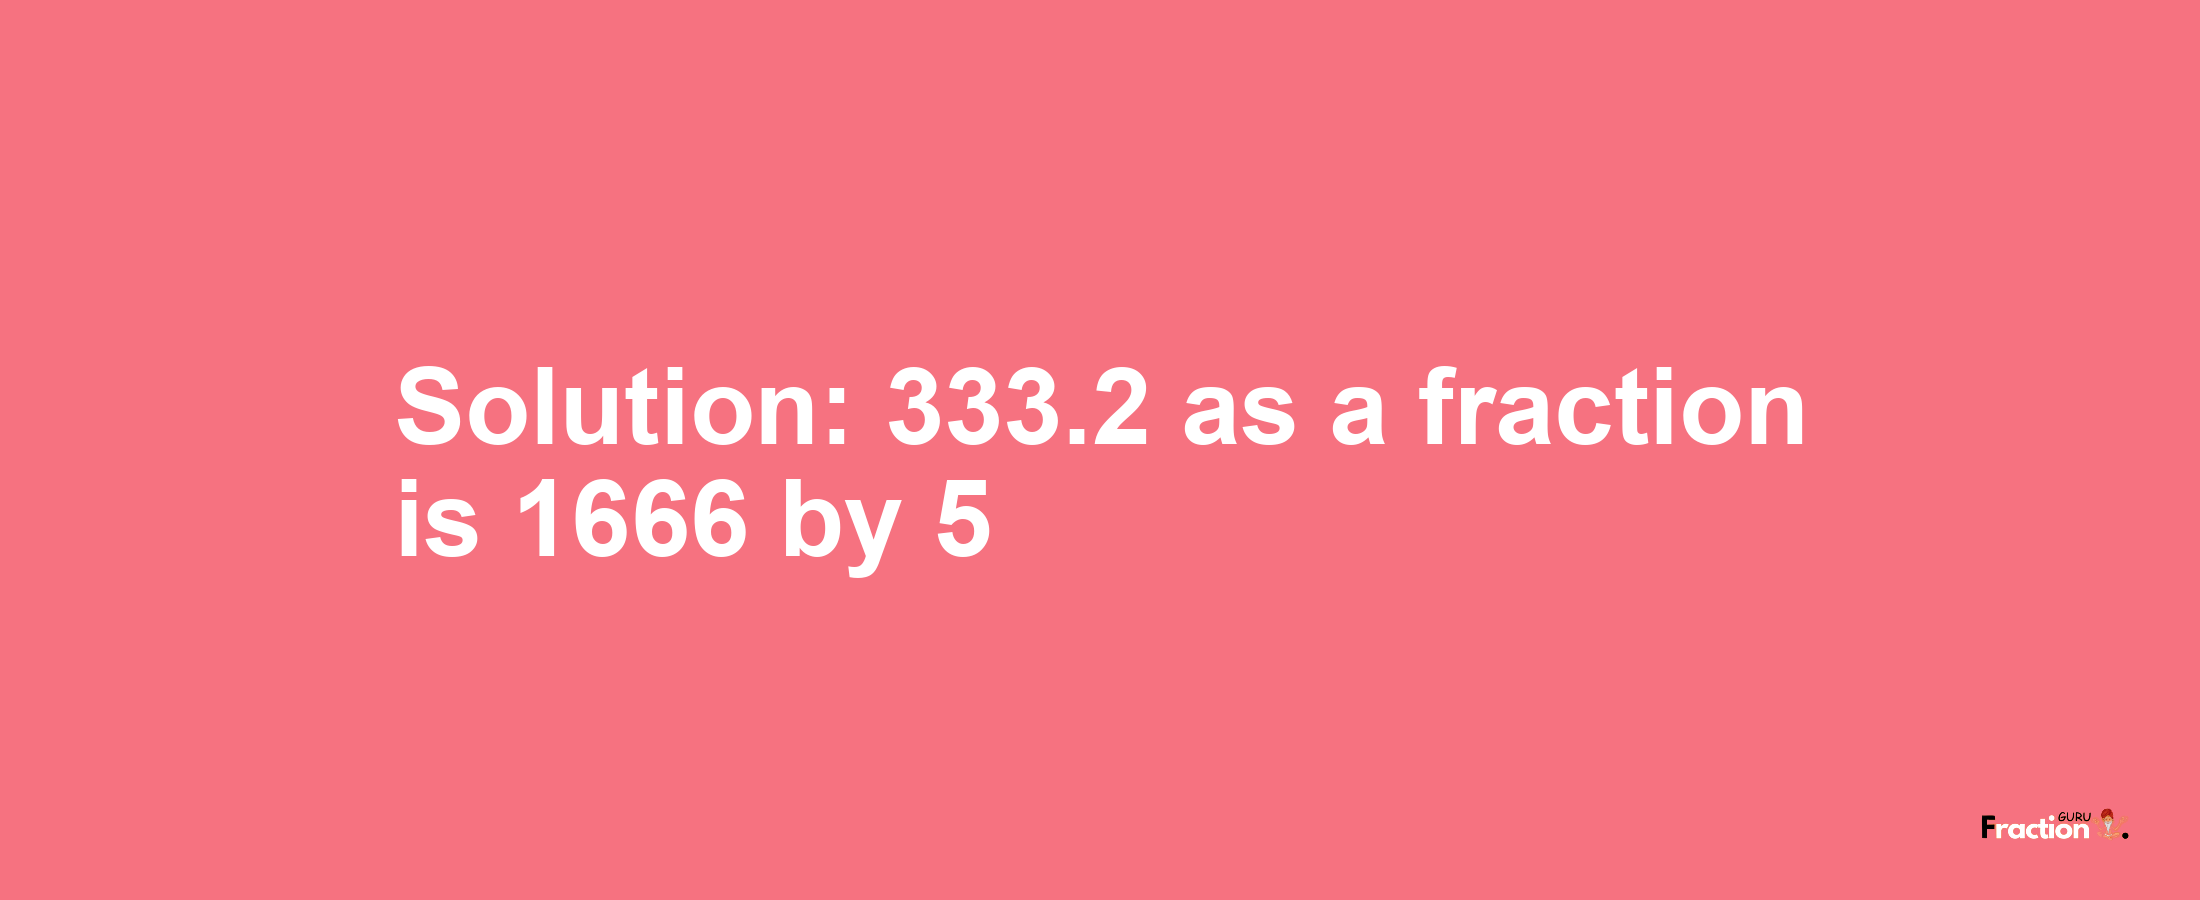 Solution:333.2 as a fraction is 1666/5